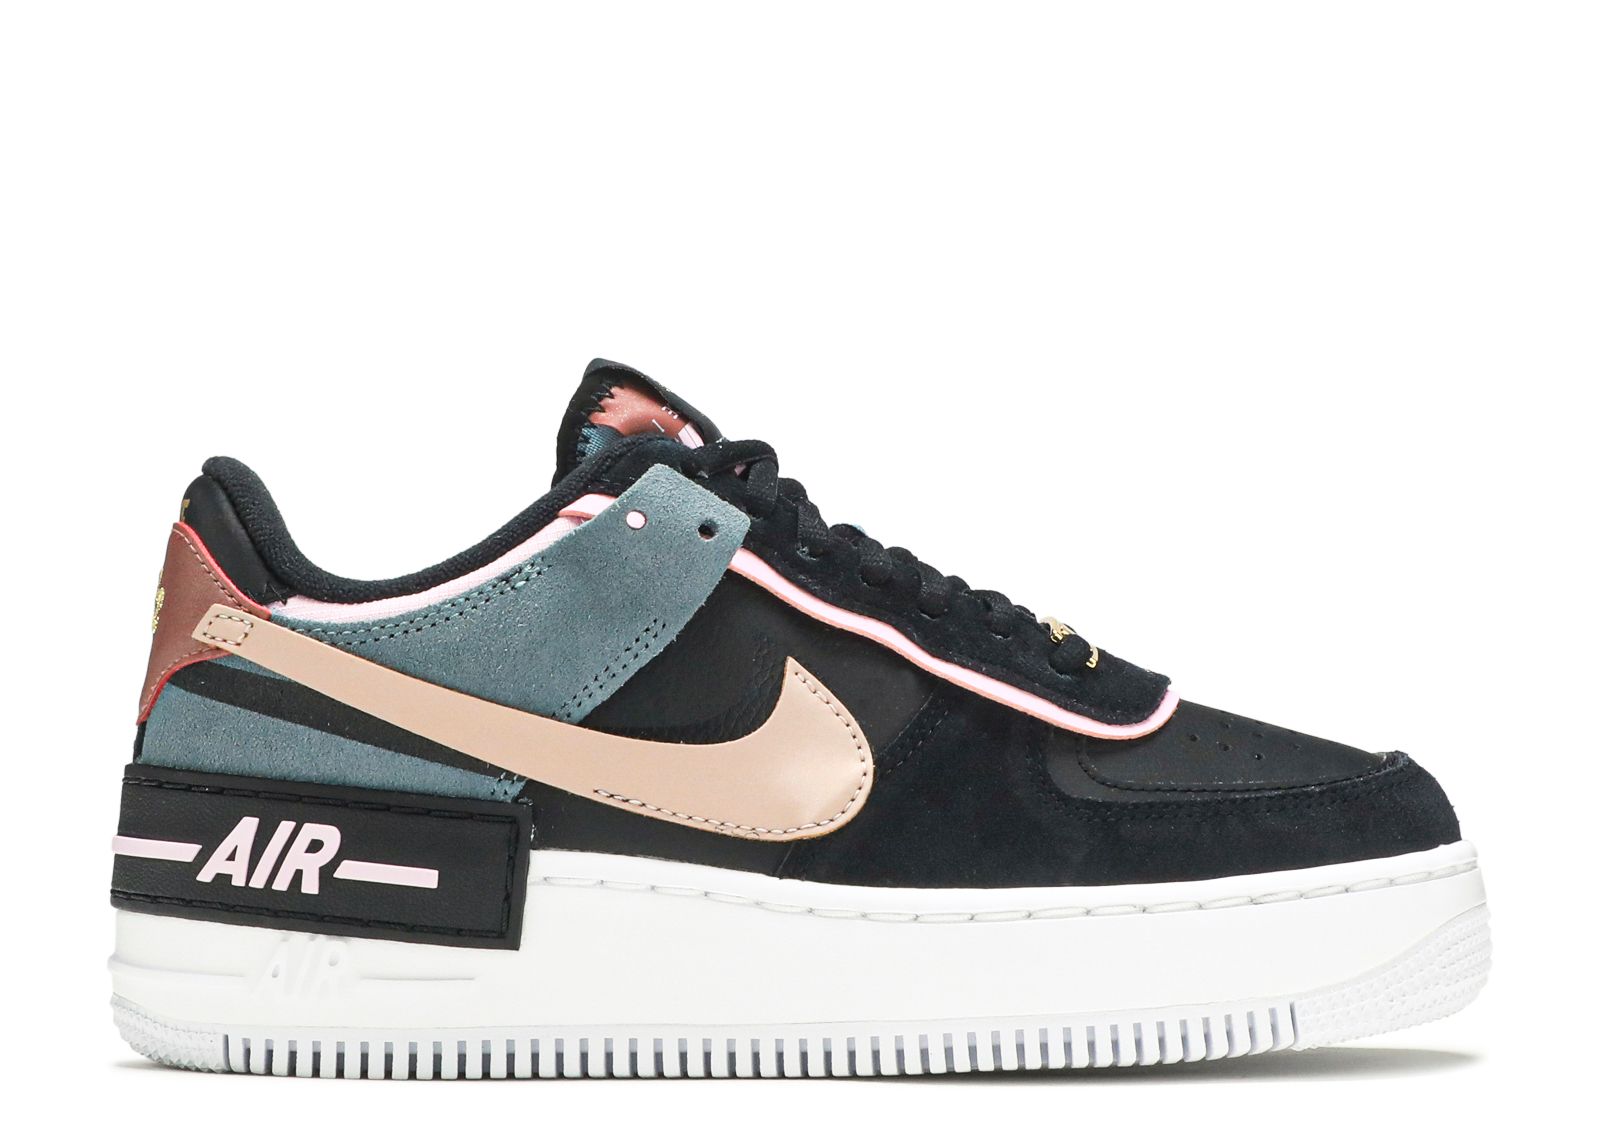 nike air force 1 shadow black and pink